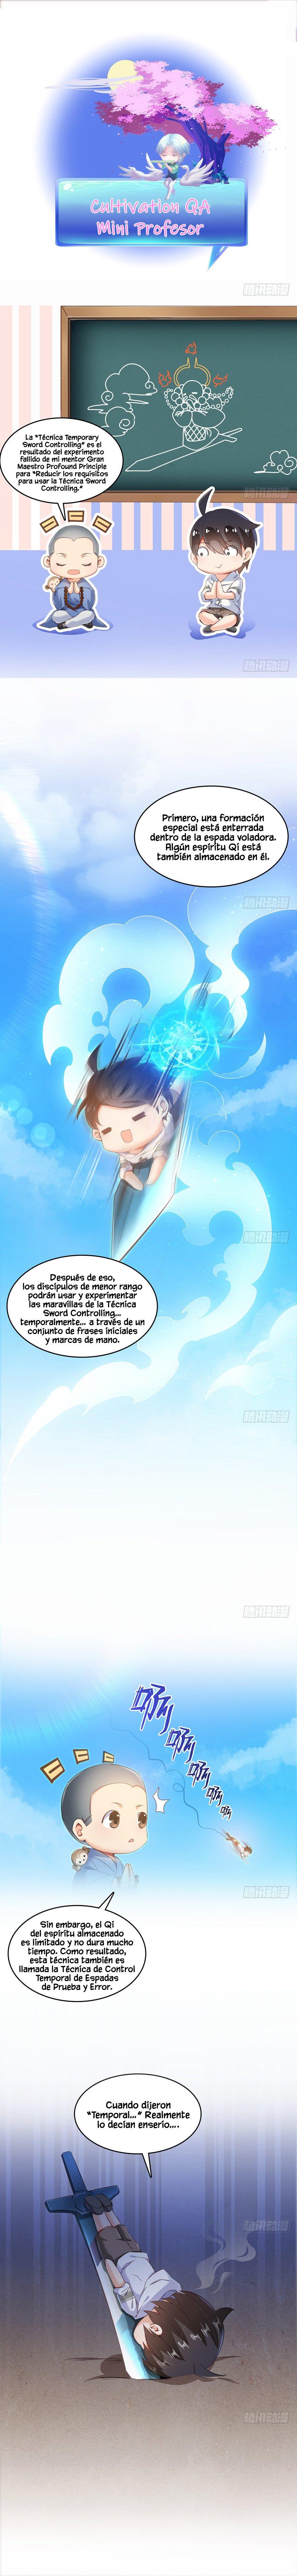 Manga Cultivation Chat Group Chapter 53 image number 10